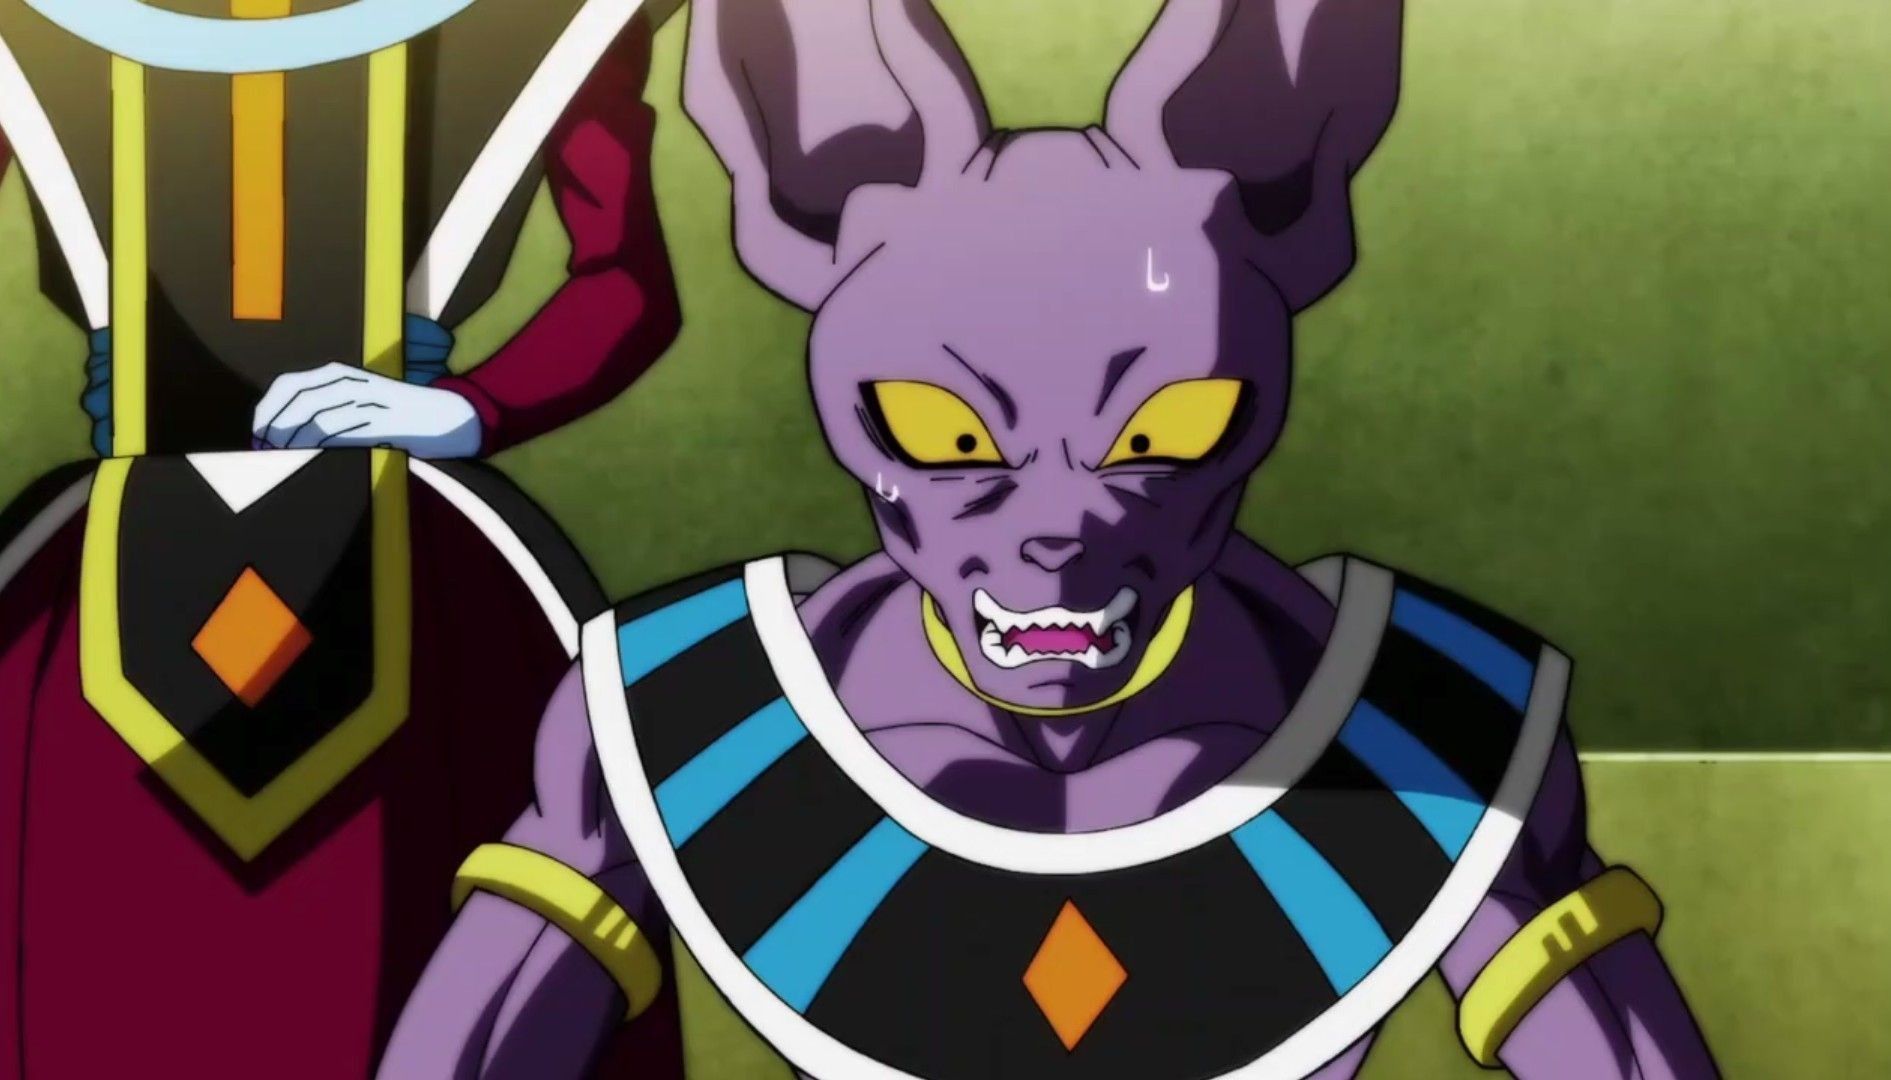 Beerus as seen in the anime (Image via Toei Animation)